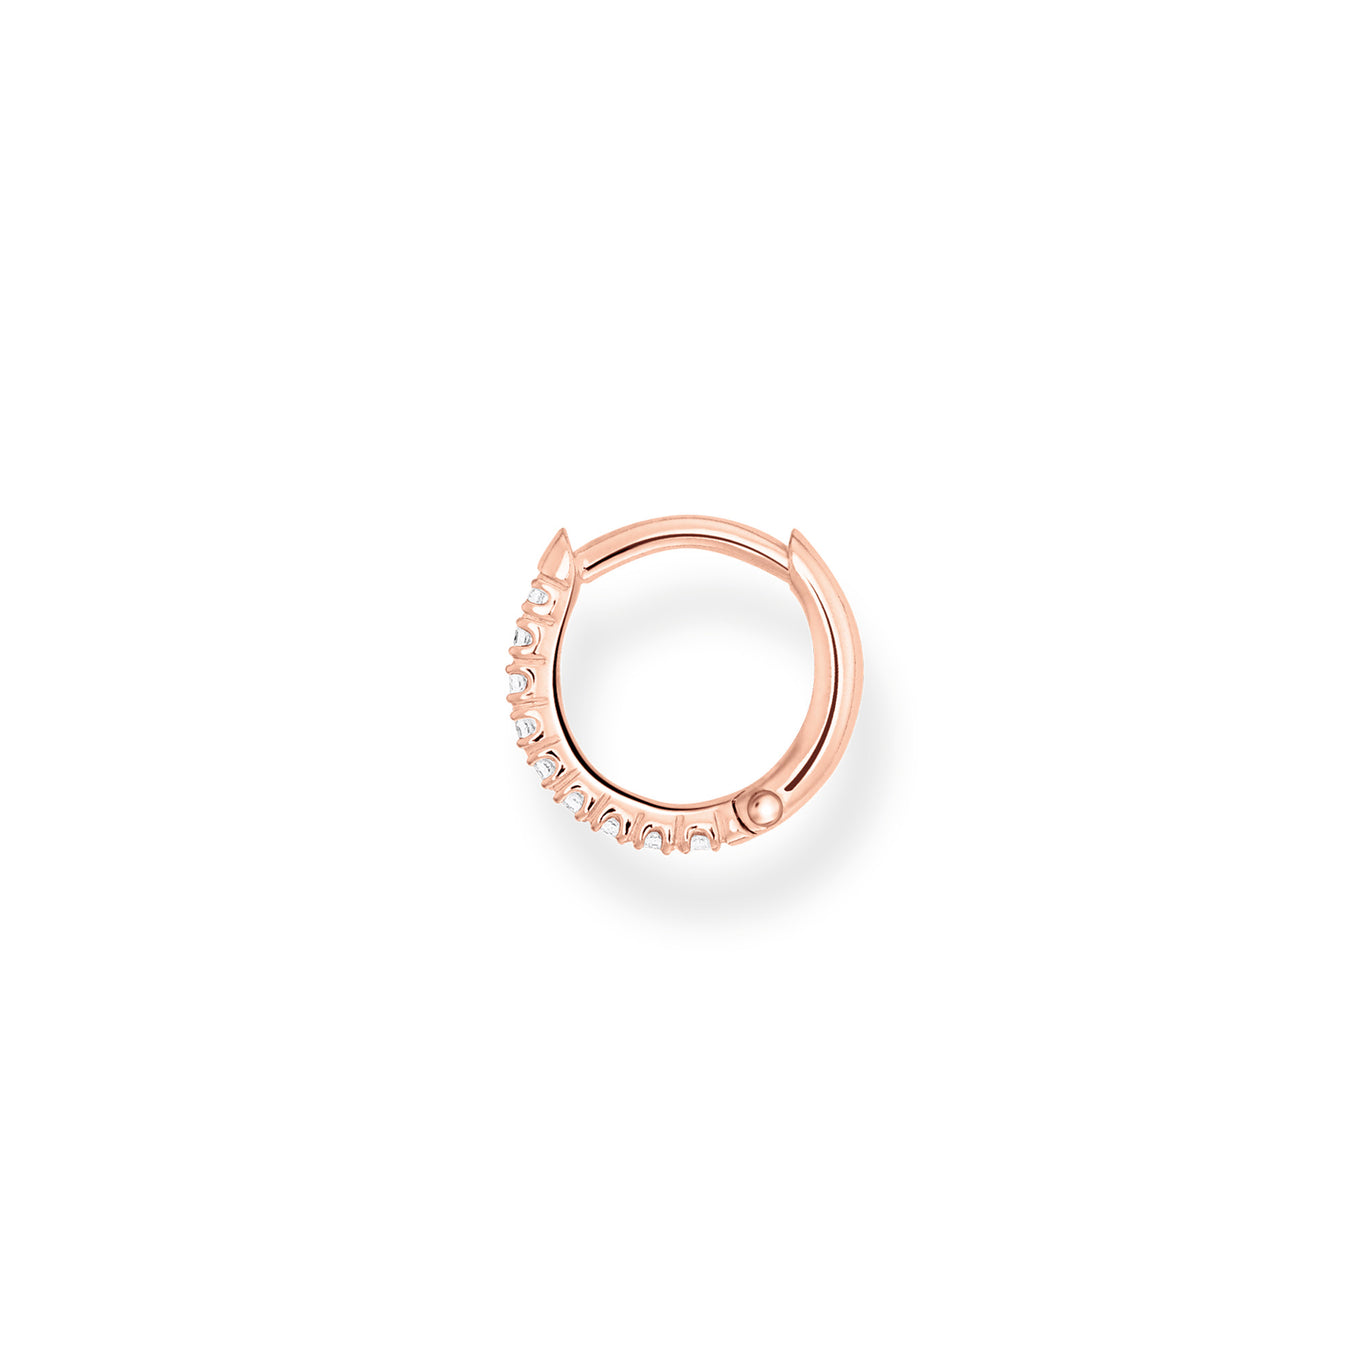 Thomas Sabo Rose Gold Single Hoop Earring with White Stones